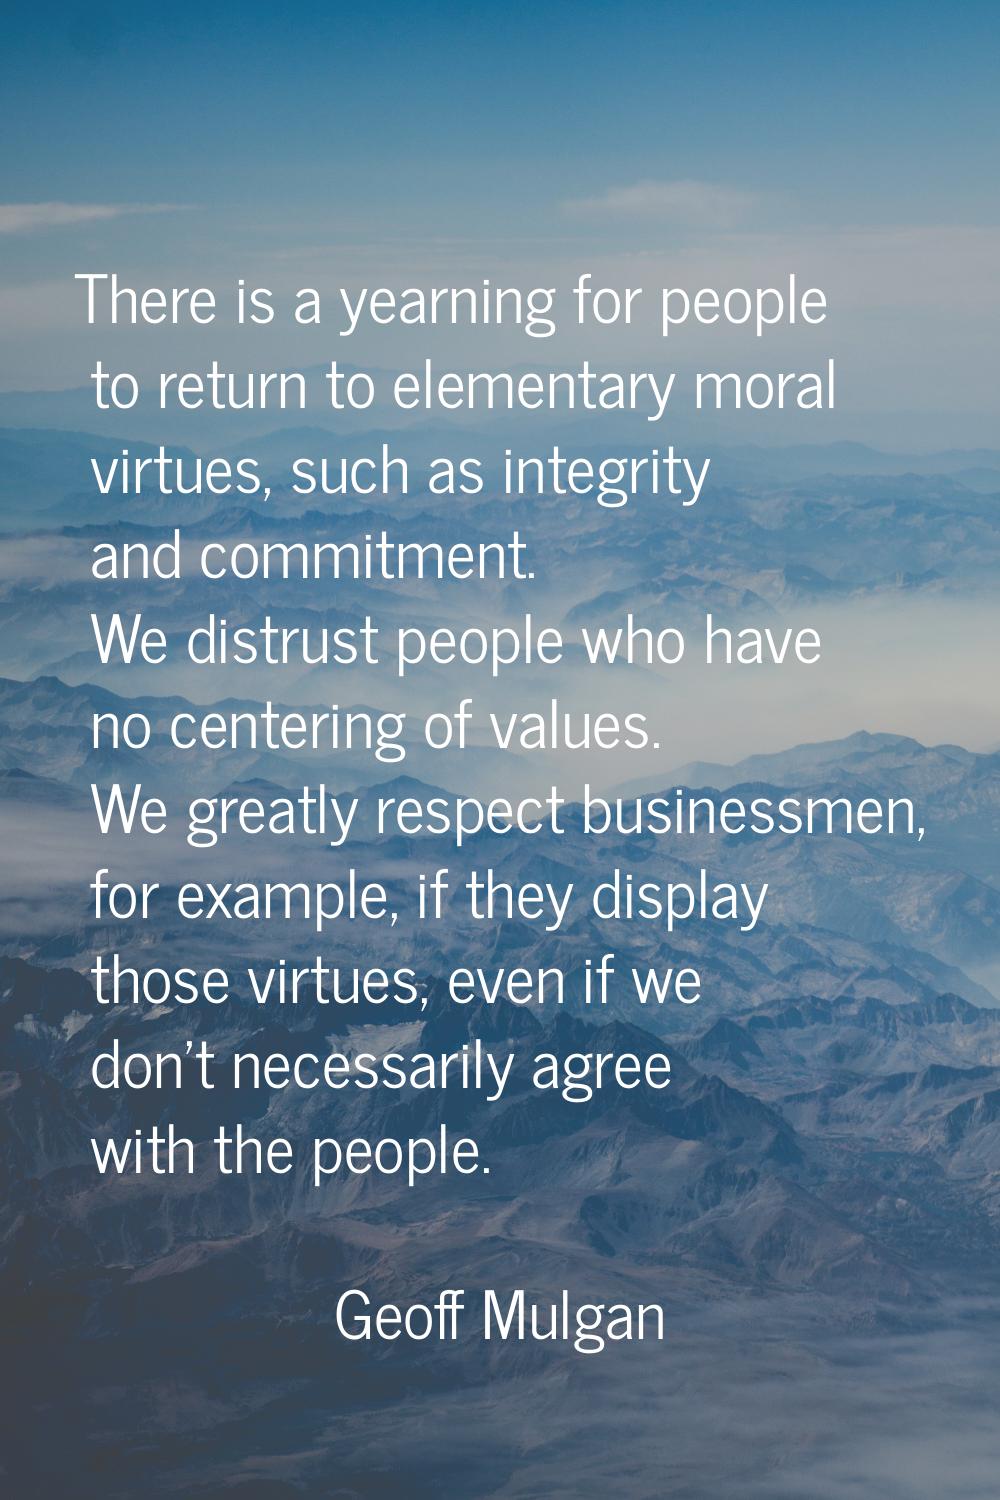 There is a yearning for people to return to elementary moral virtues, such as integrity and commitm